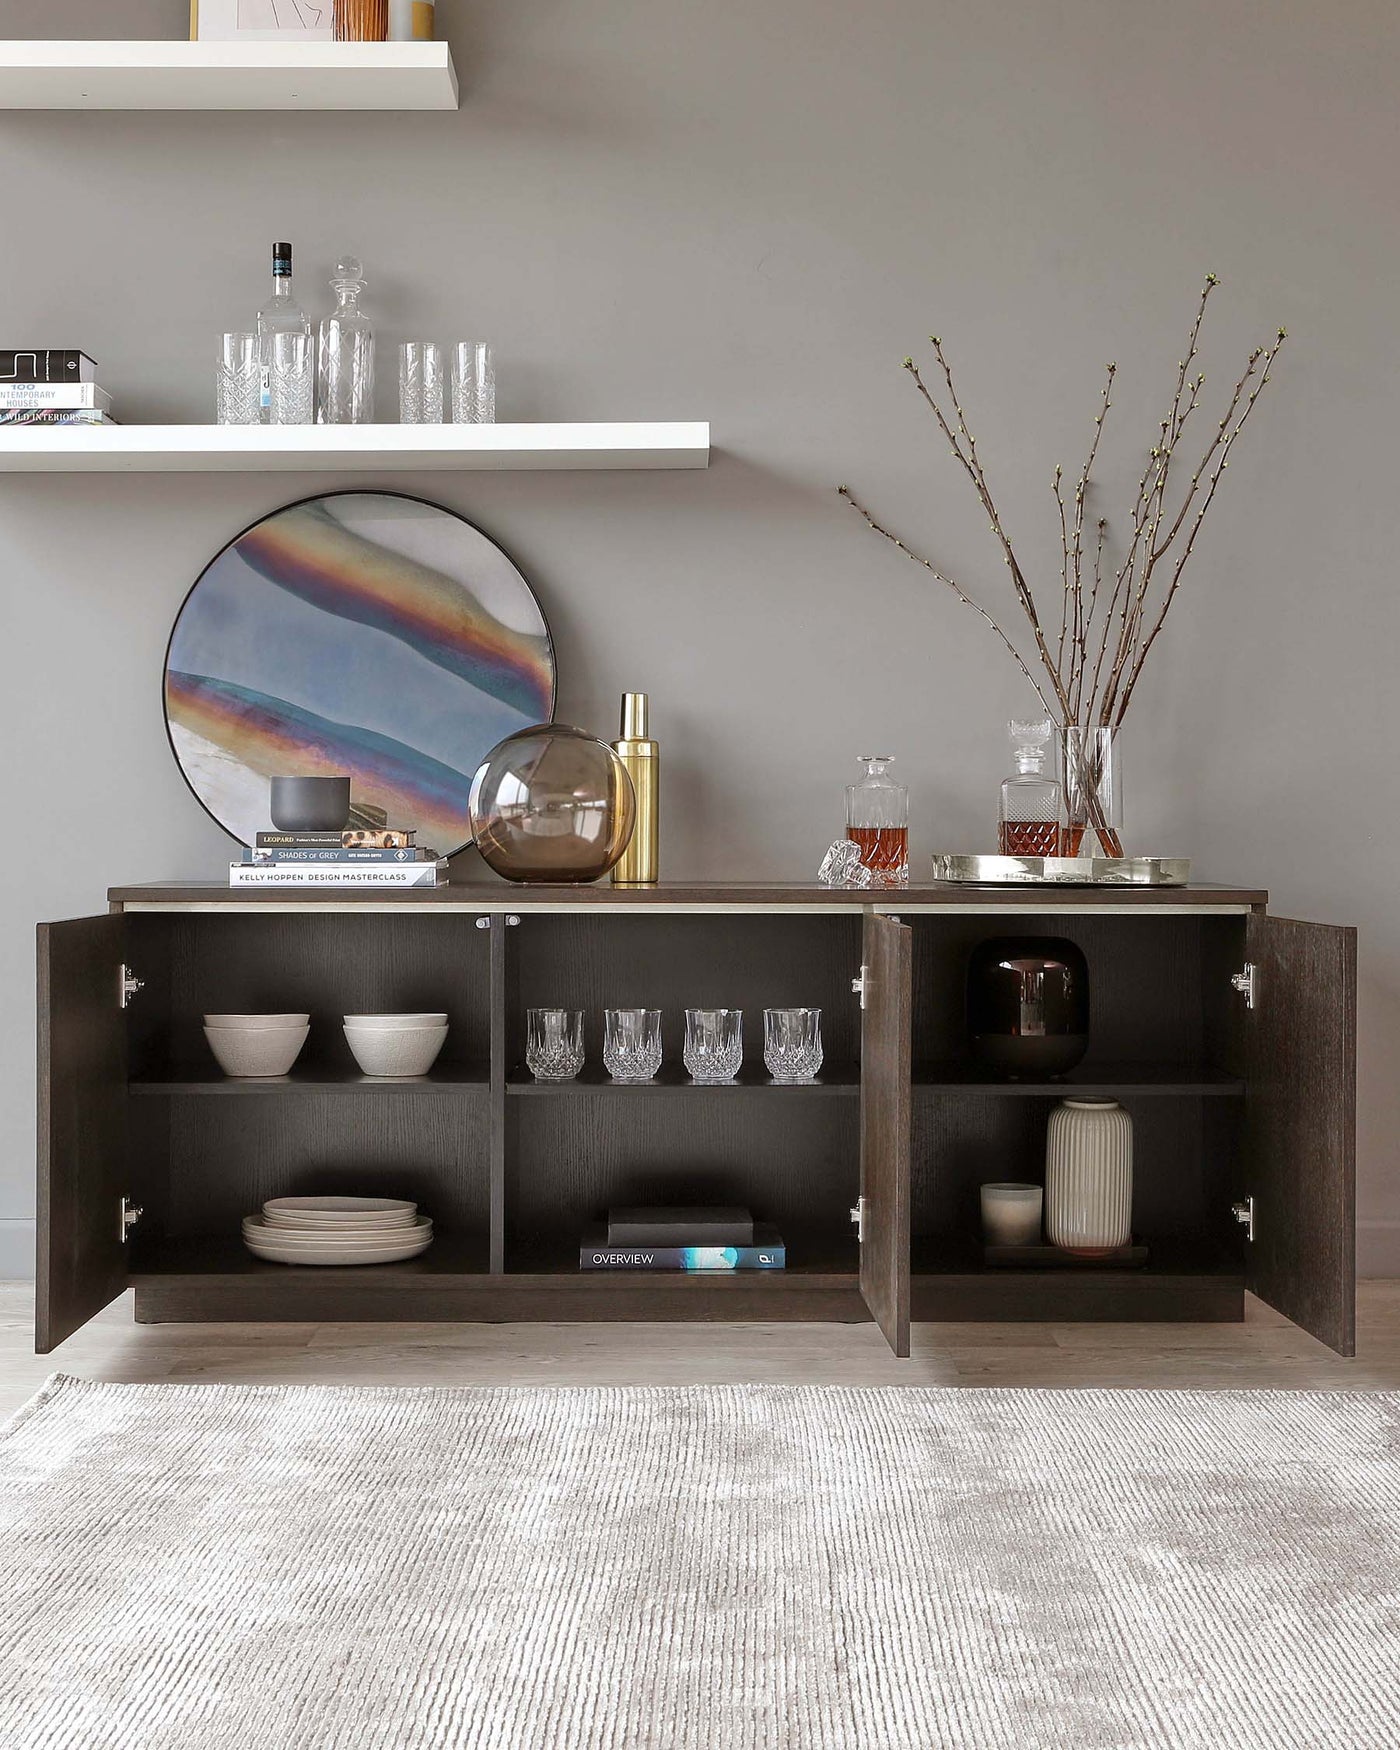 Contemporary espresso-finished sideboard featuring two open shelves with back panel, flanked by two cabinets with hinged doors. The shelves are styled with an assortment of white bowls, plates, and glasses, while the top surface displays decorative items. A sleek, white floating shelf hangs above, carrying glassware, and a round, framed mirror with an abstract design rests against the wall. Completing the arrangement is a textured, off-white area rug beneath the sideboard.